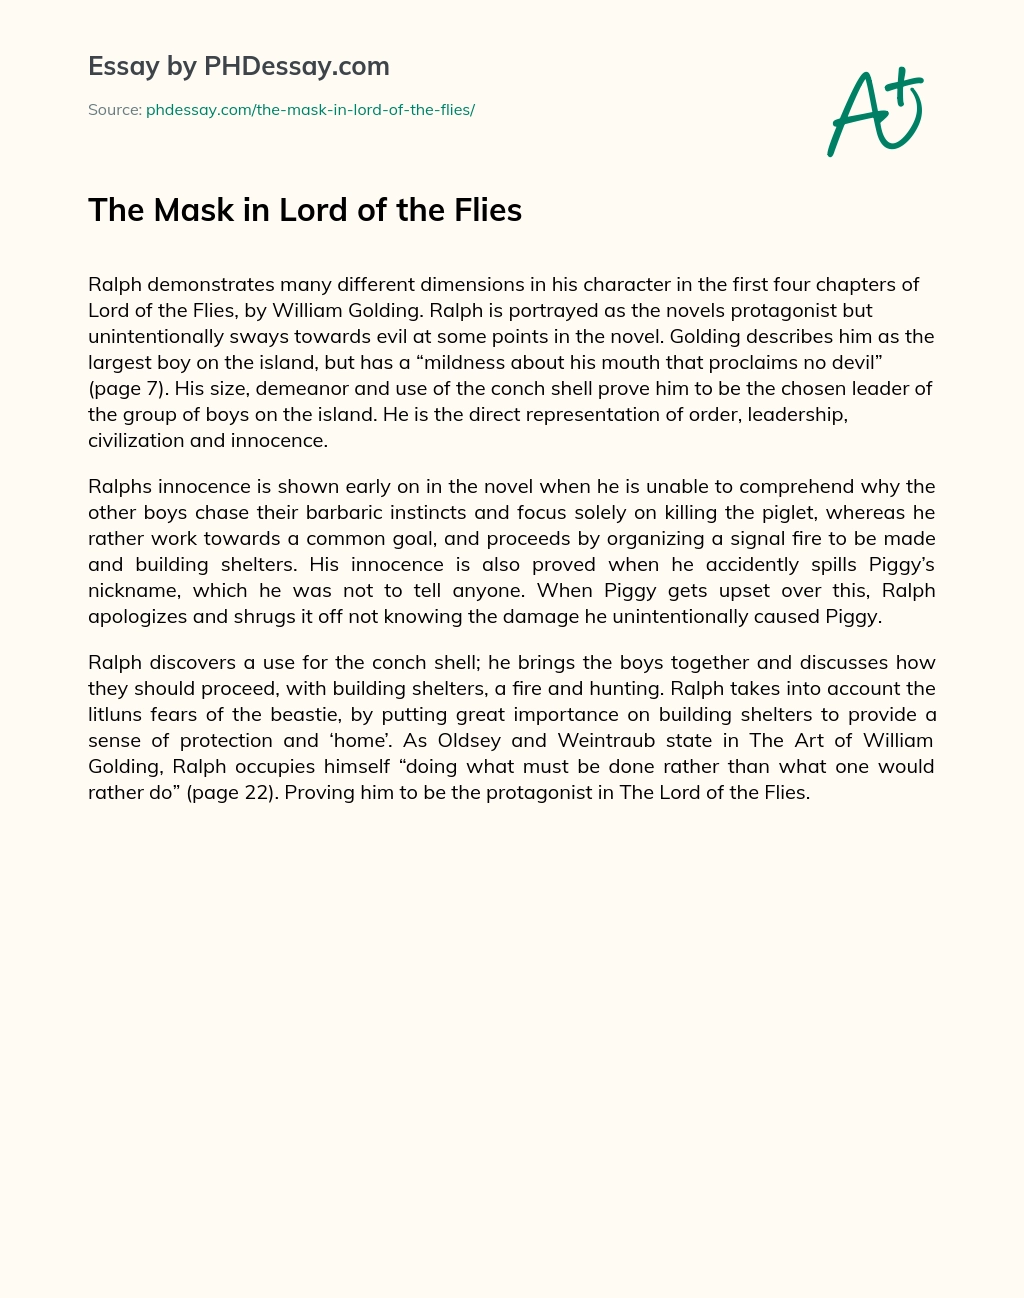 The Mask in Lord of the Flies essay